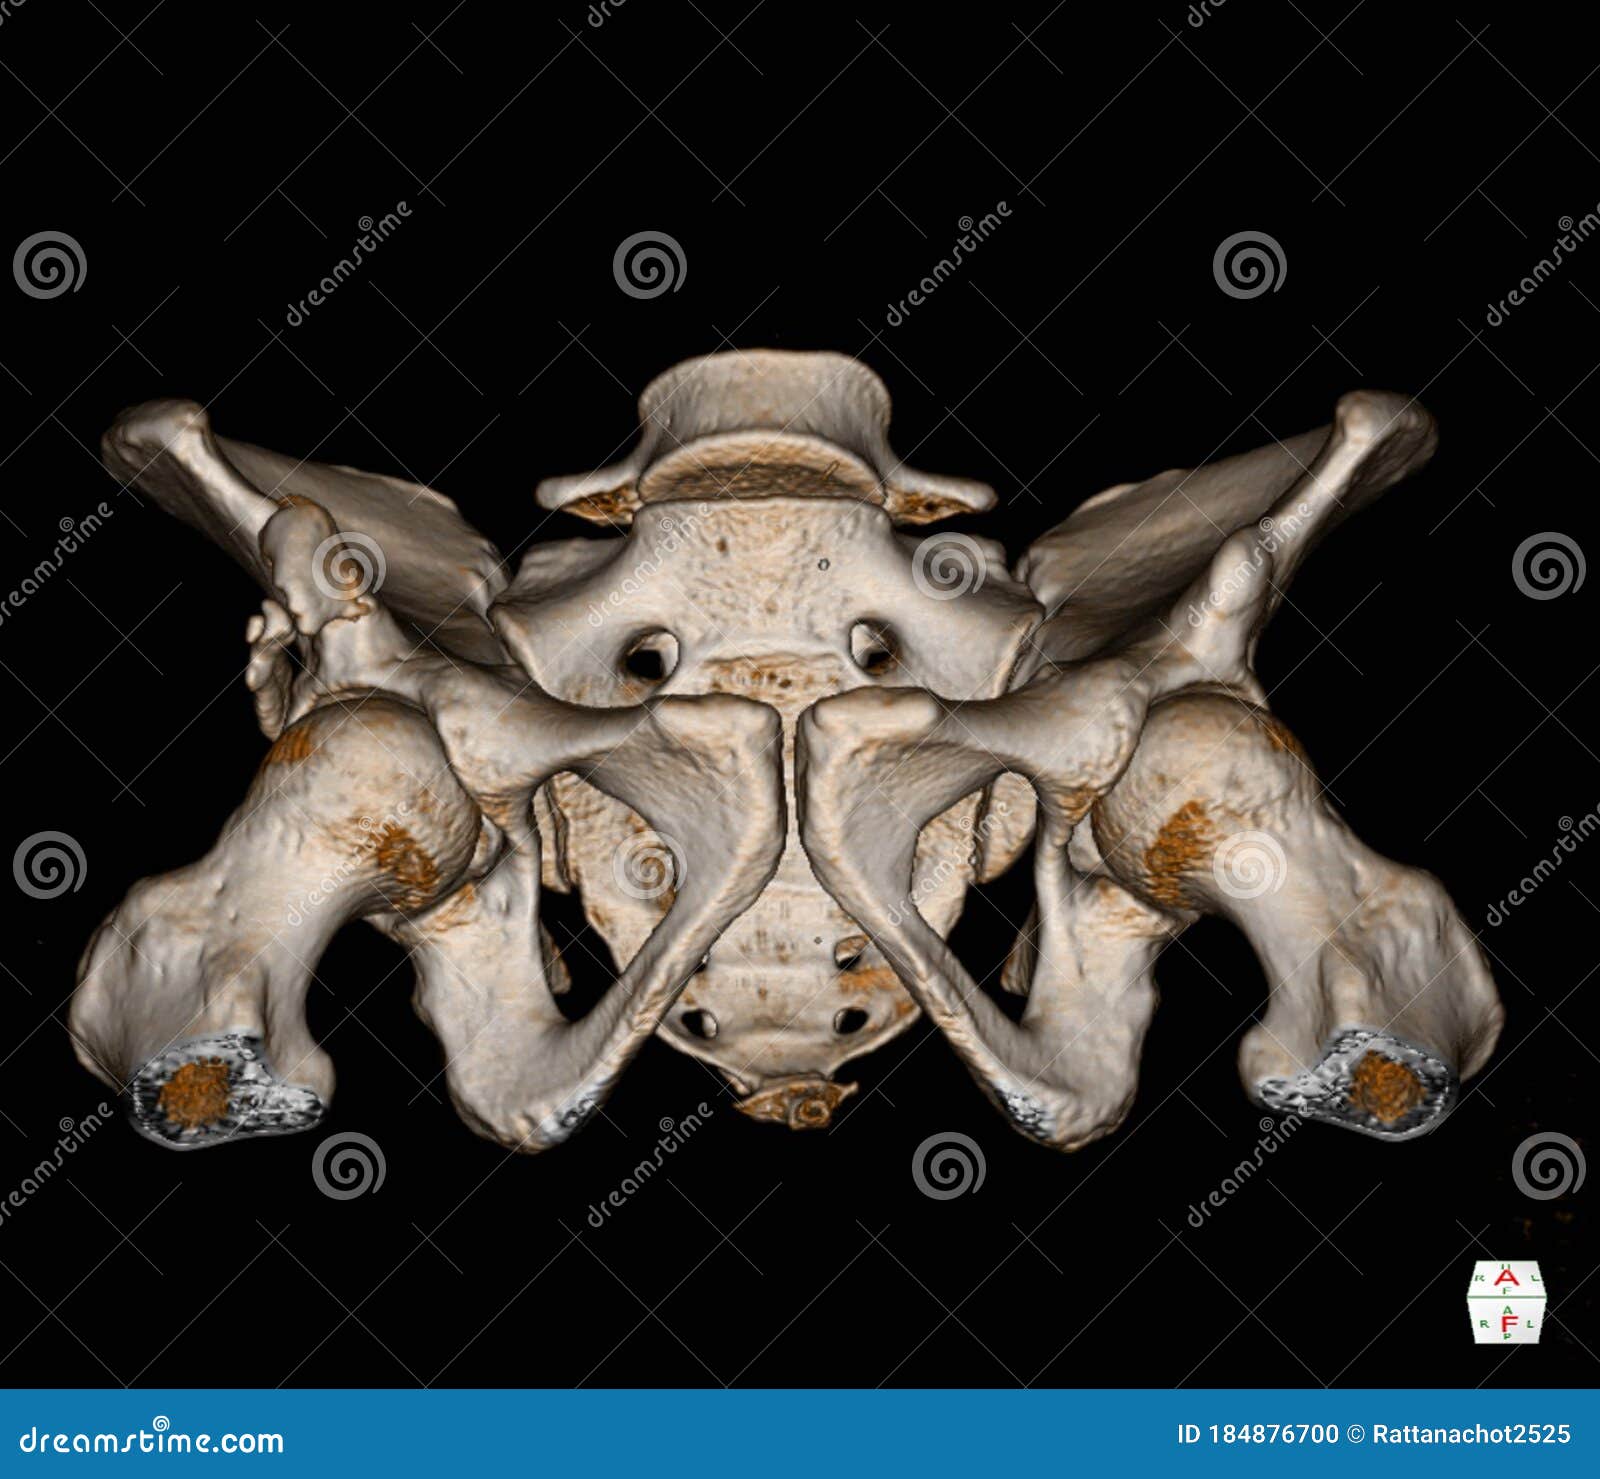 Ct Scan Pelvis Bone 3d Rendering Image Isolated On Black Background Showing There Is A 8mm Thick And 5cm Long Tubular Ossification Stock Illustration Illustration Of Exam Anatomy 184876700